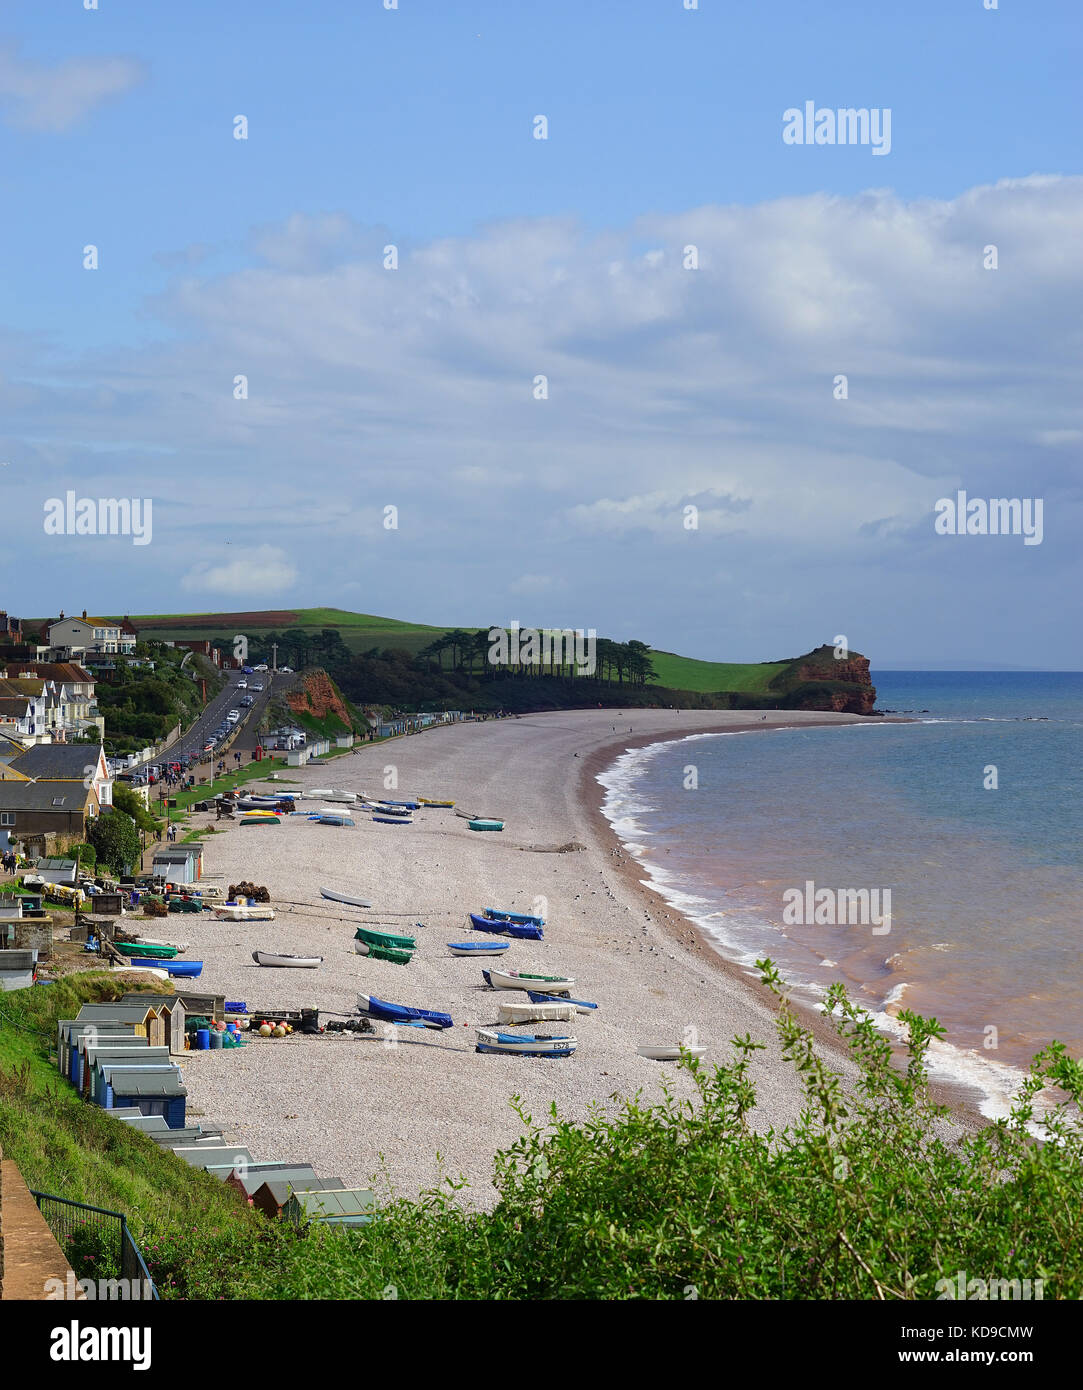 A View From The Cliff Path Along The Beach At Budleigh Salterton Stock Photo Alamy